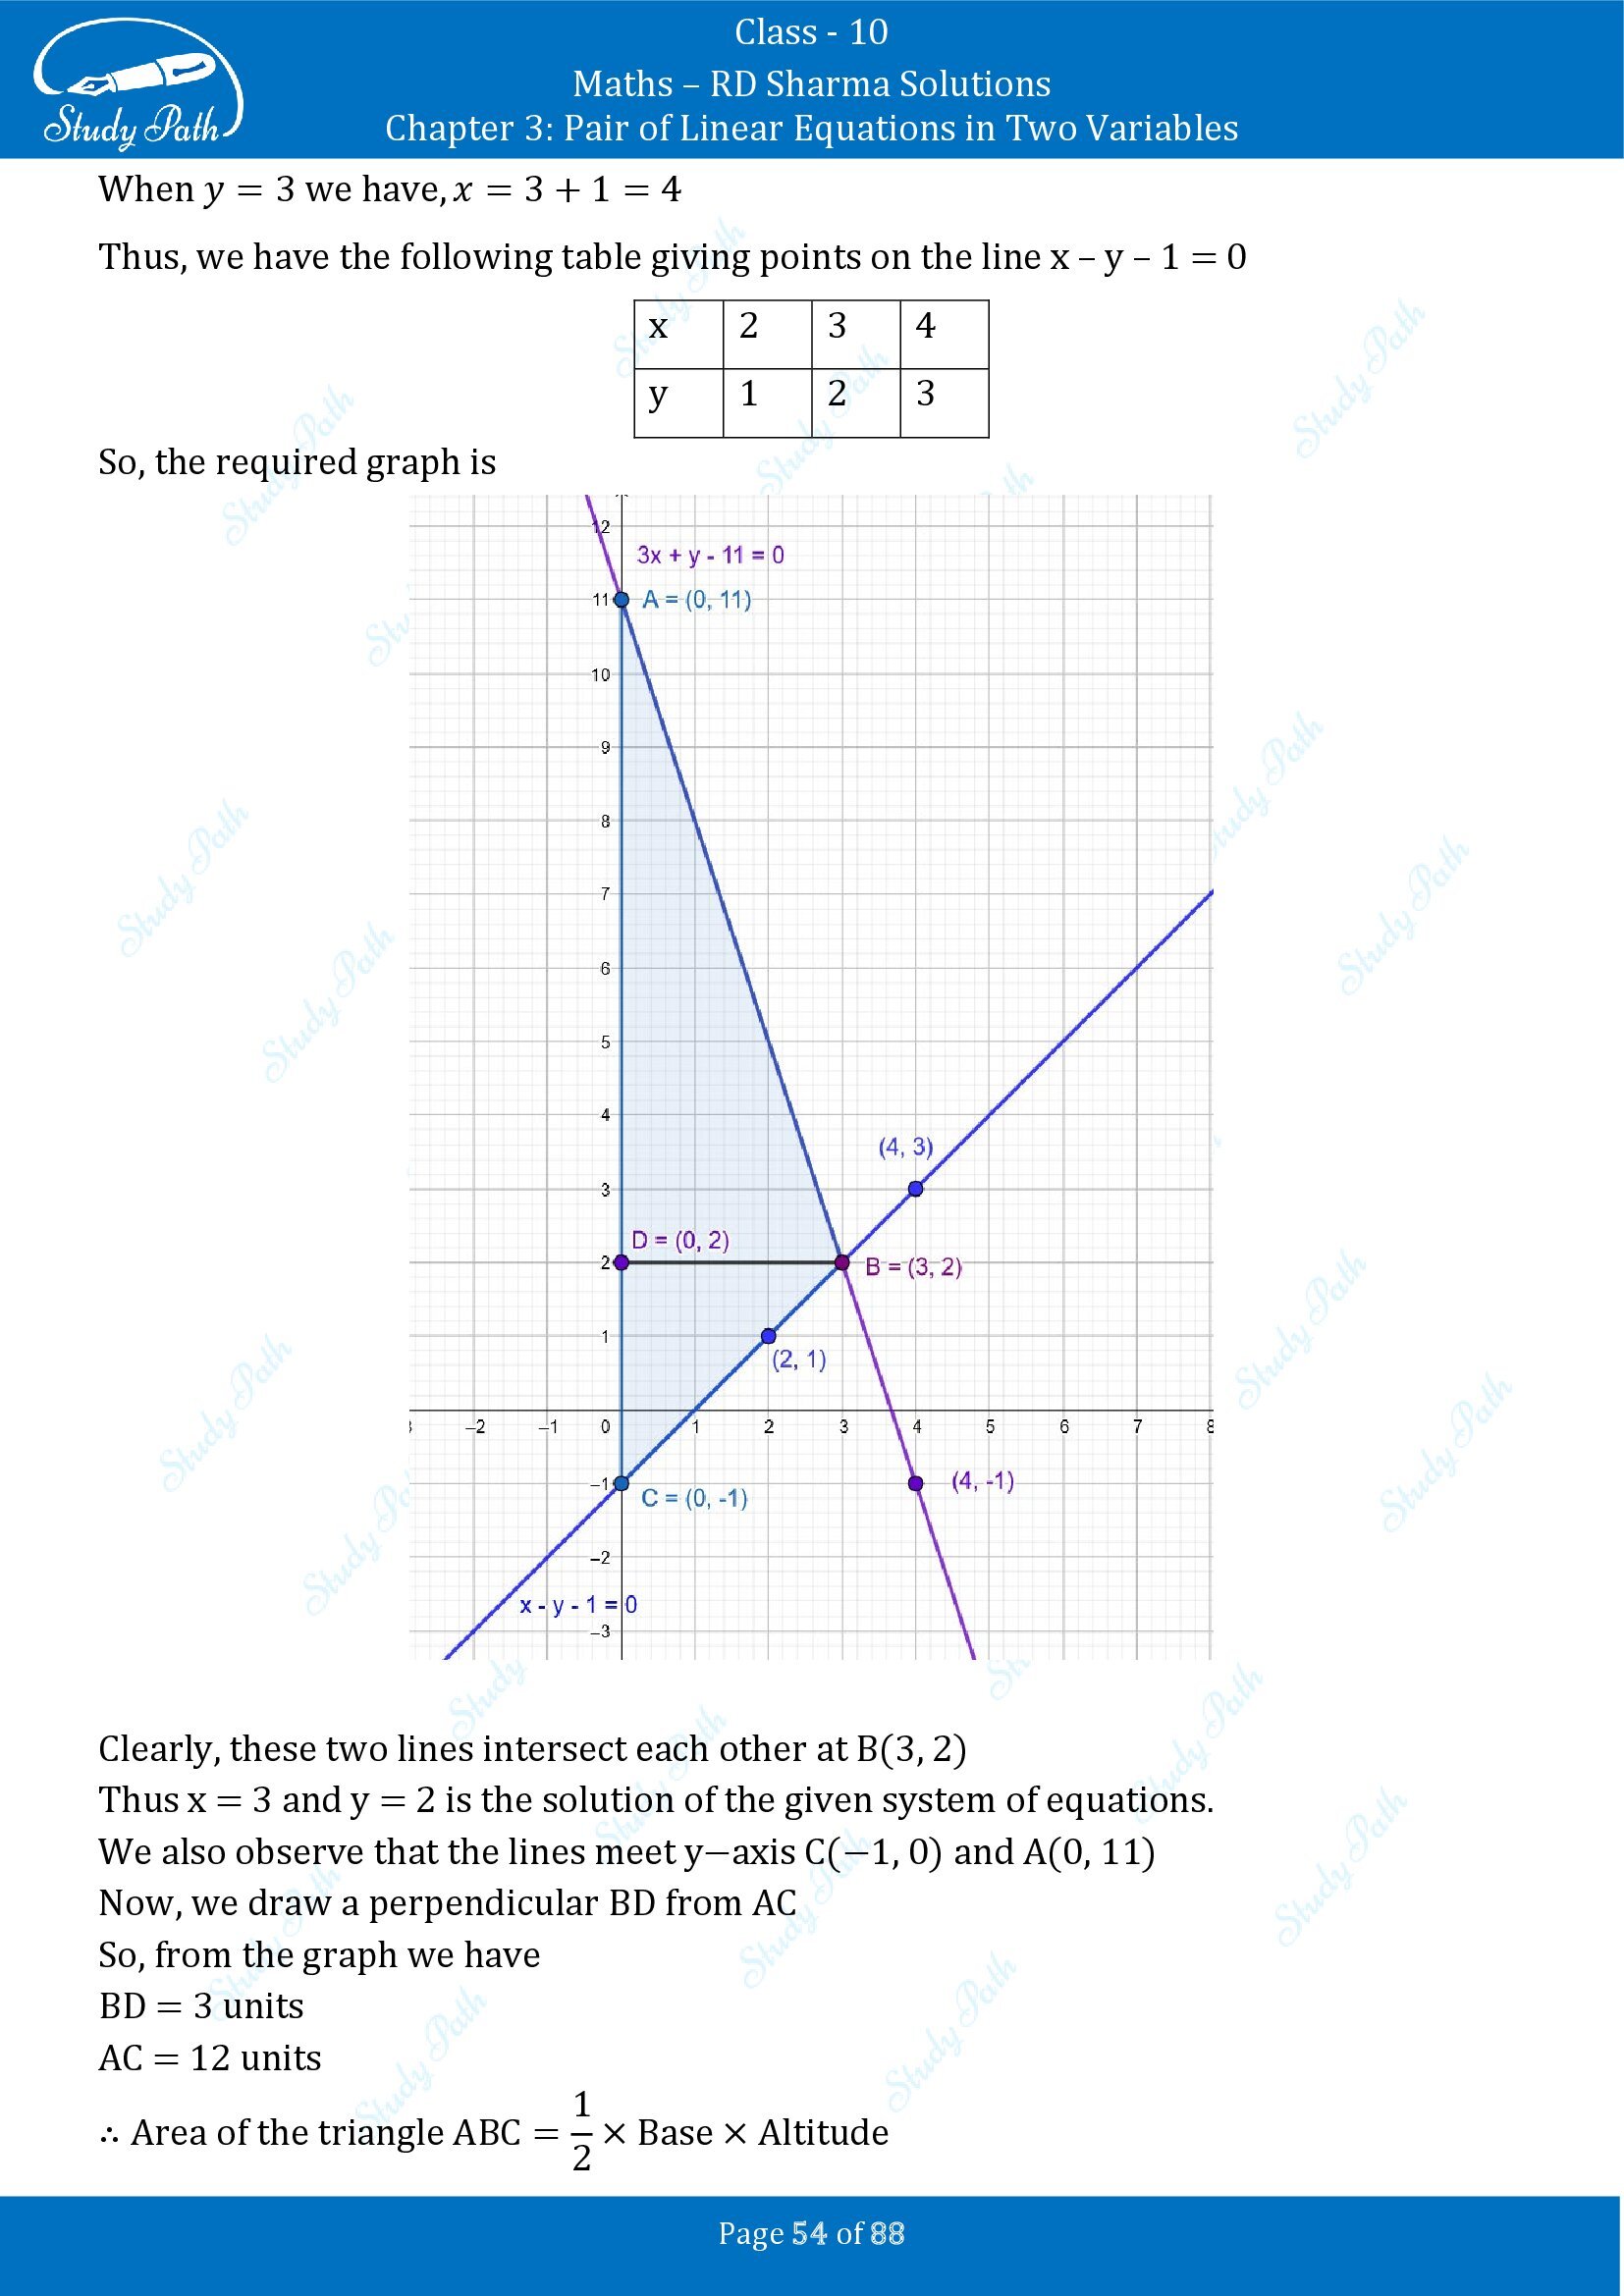 RD Sharma Solutions Class 10 Chapter 3 Pair of Linear Equations in Two Variables Exercise 3.2 00054